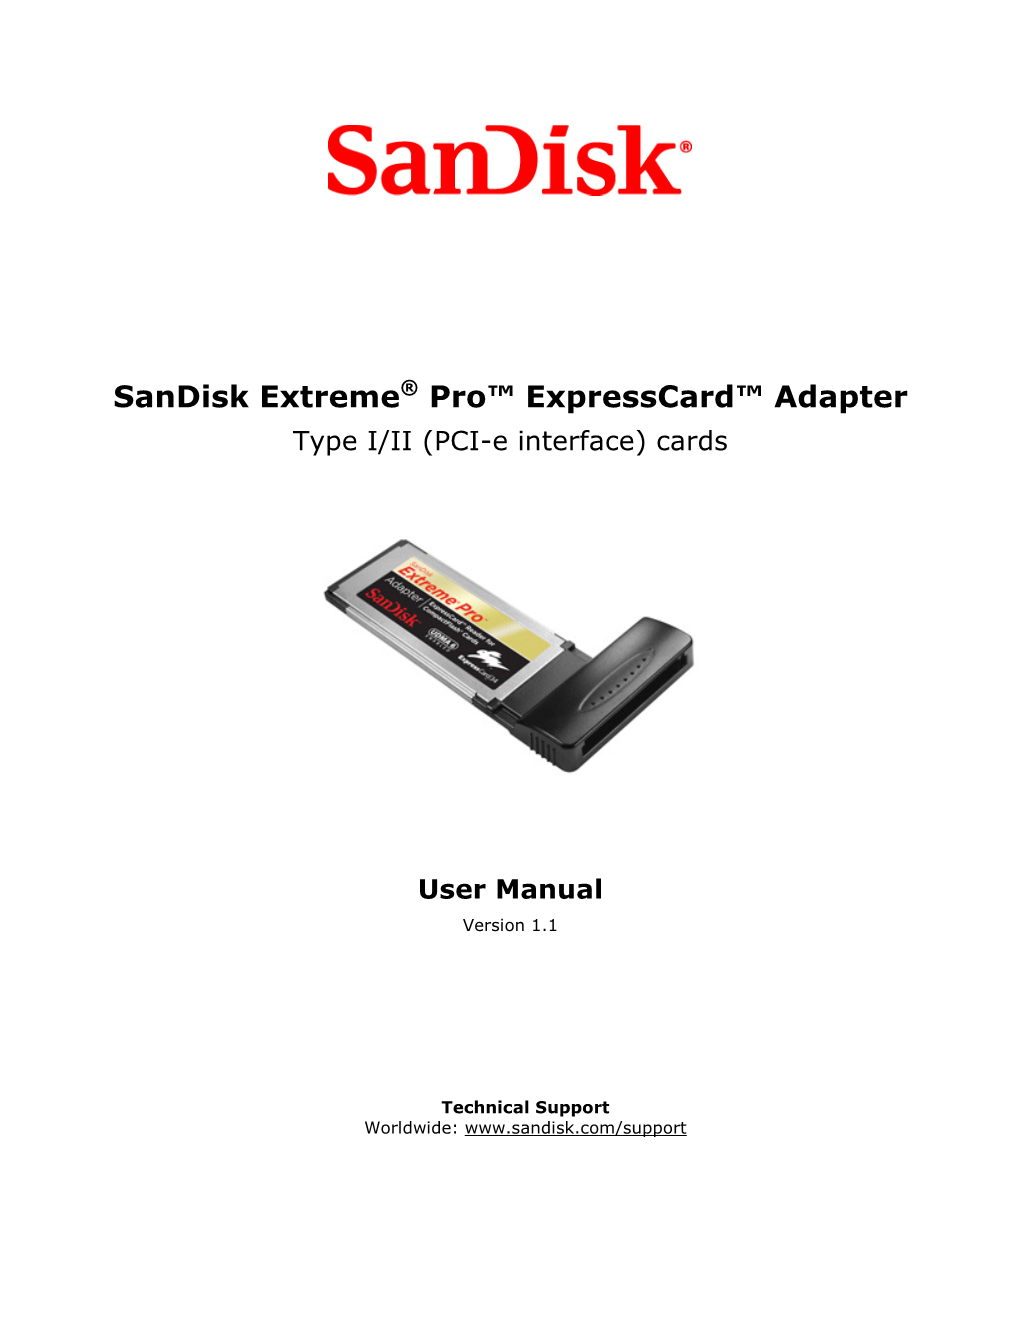 Sandisk Extreme Pro Expresscard Adapter User's Manual